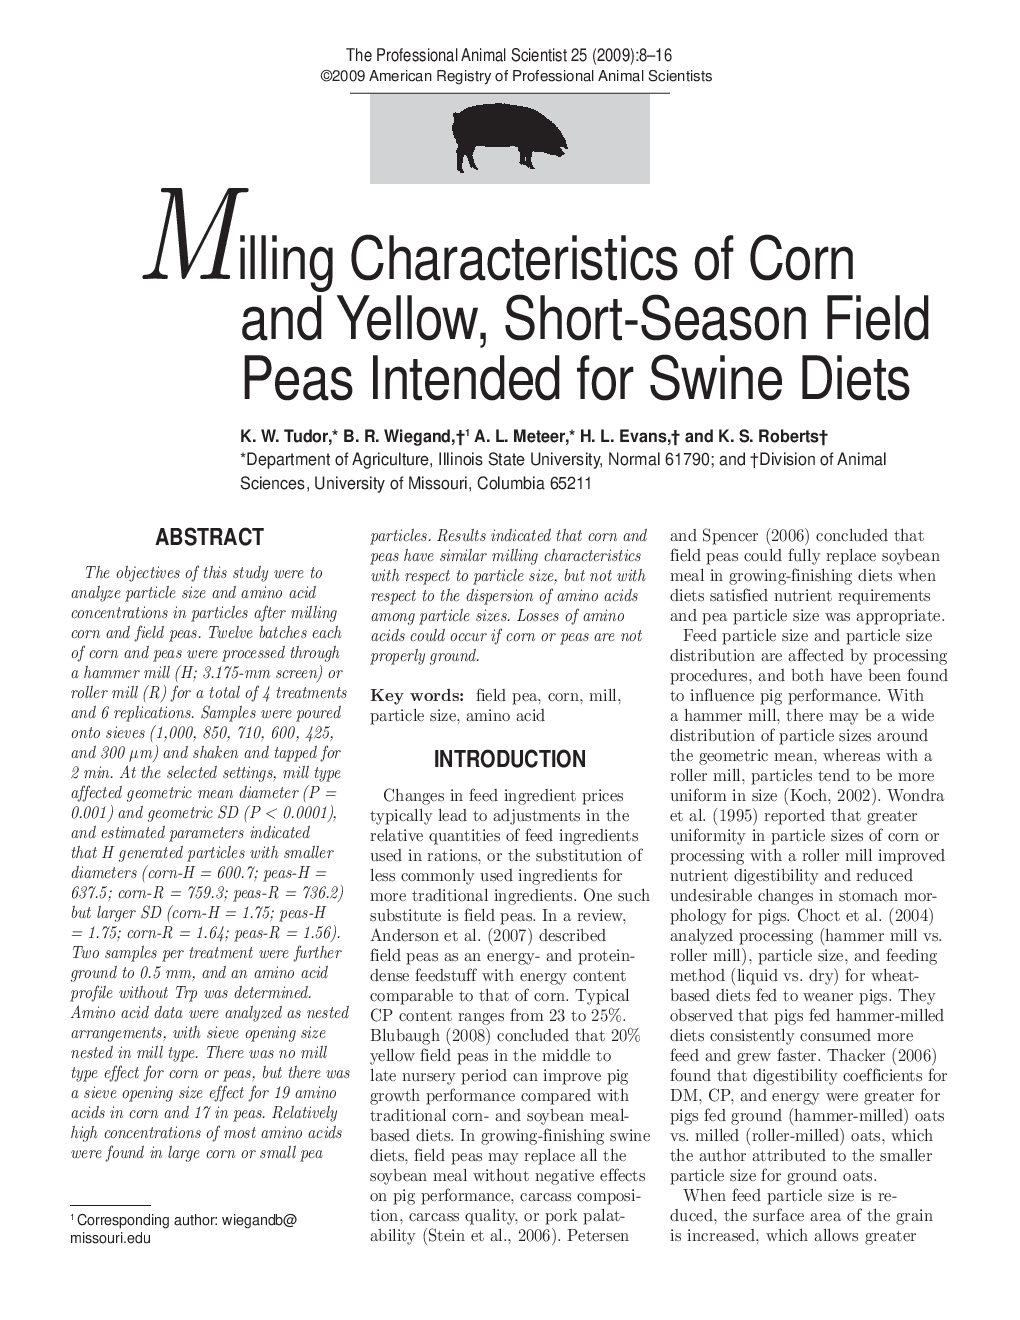 Milling Characteristics of Corn and Yellow, Short-Season Field Peas Intended for Swine Diets